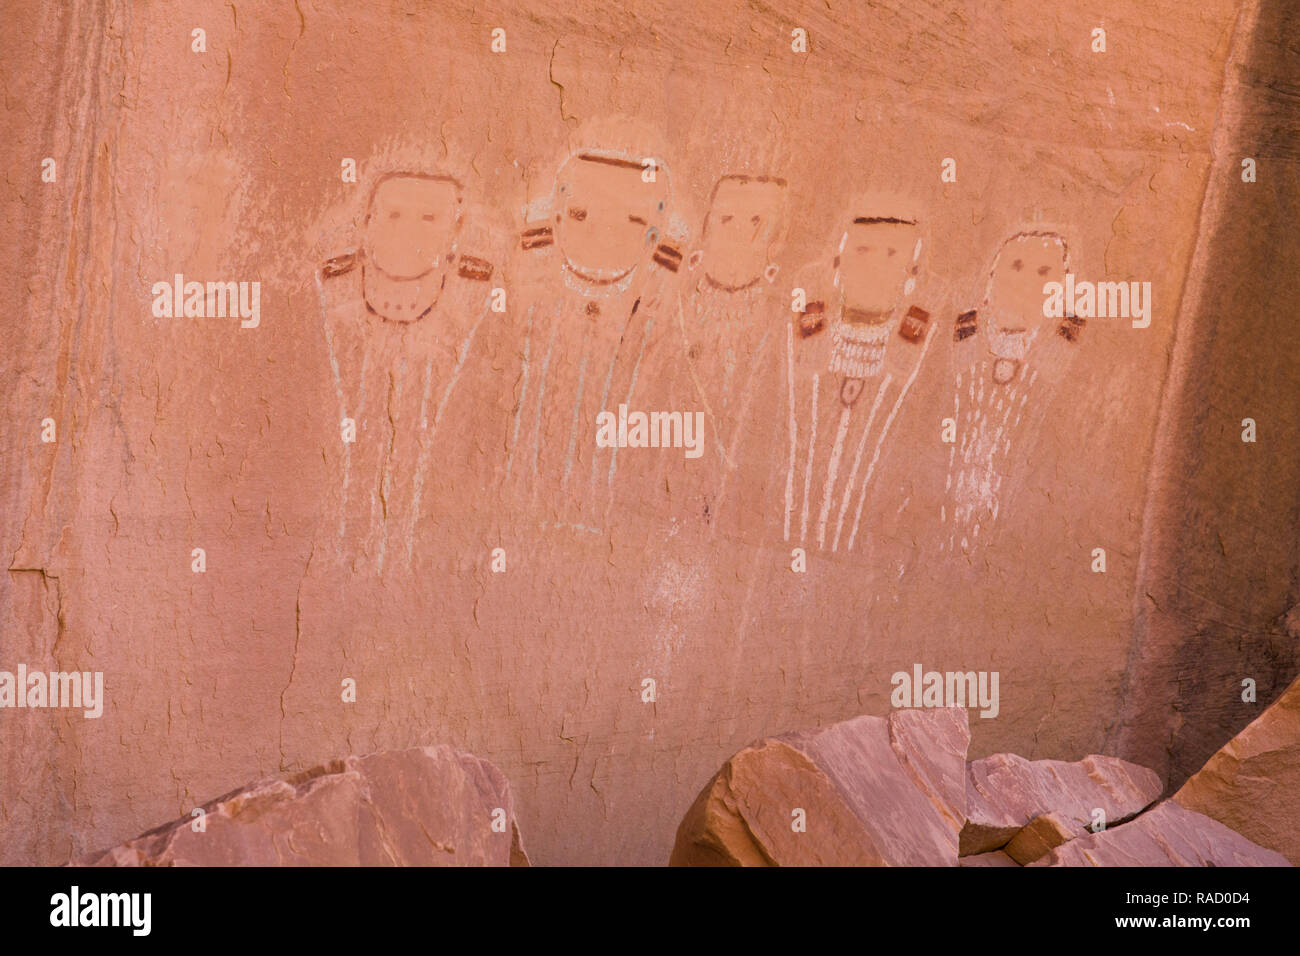 Five Faces Pictograph, Canyonlands National Park, Utah, United States of America, North America Stock Photo